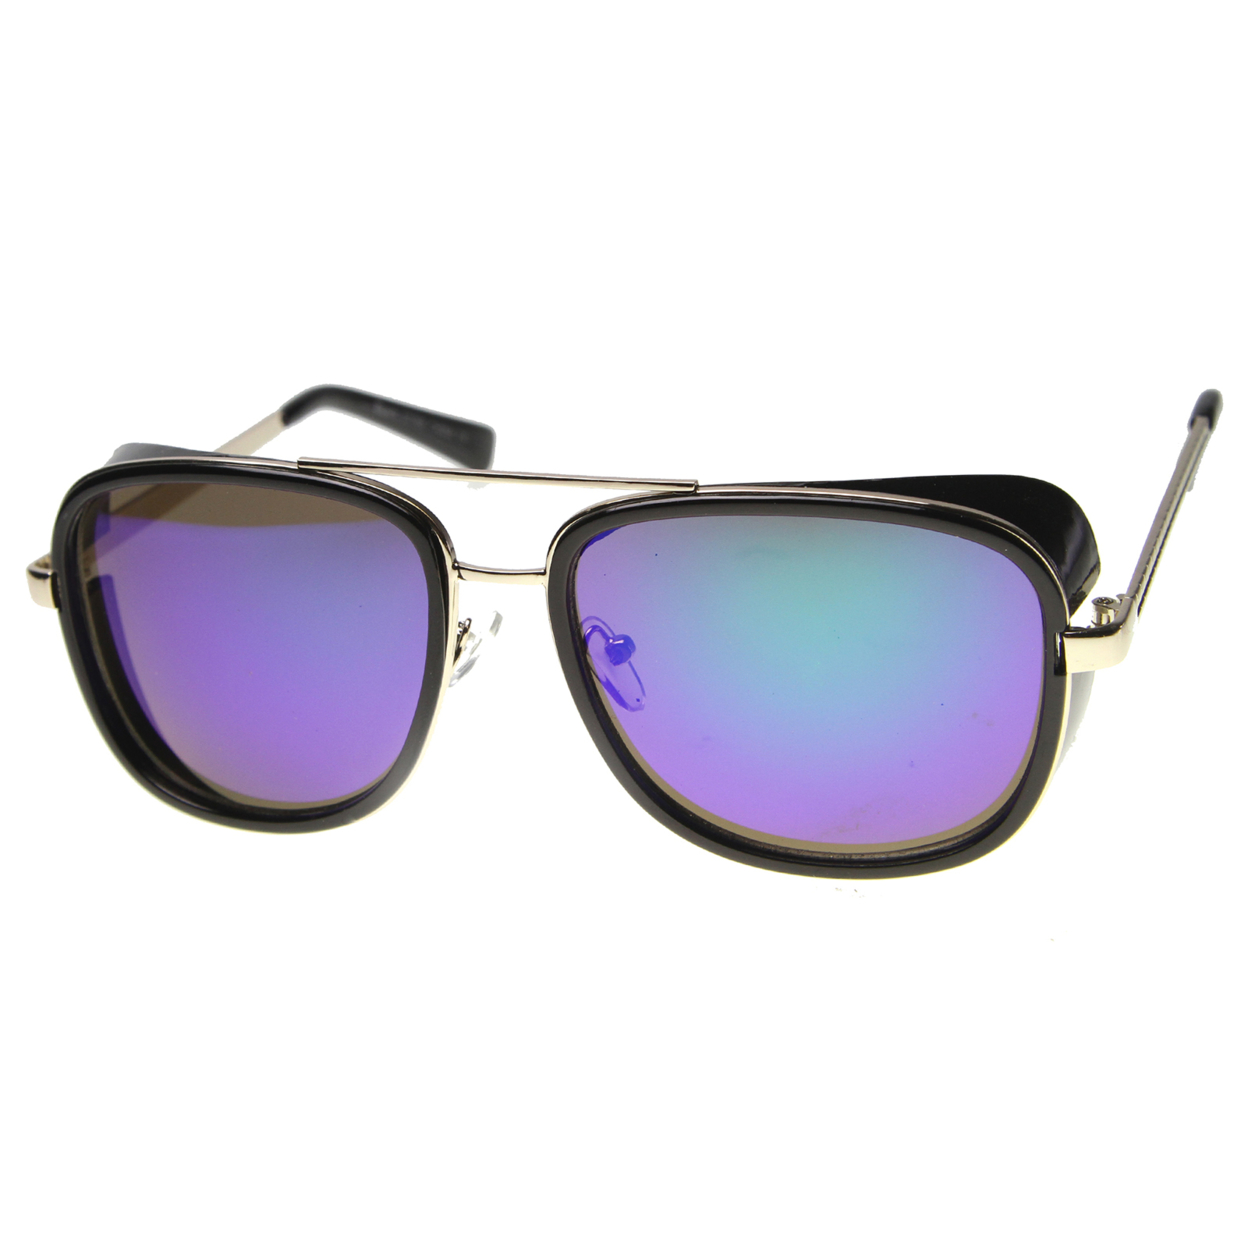 Unisex Aviator Sunglasses With UV400 Protected Mirrored Lens 9896 - Matte Black-Silver / Smoke